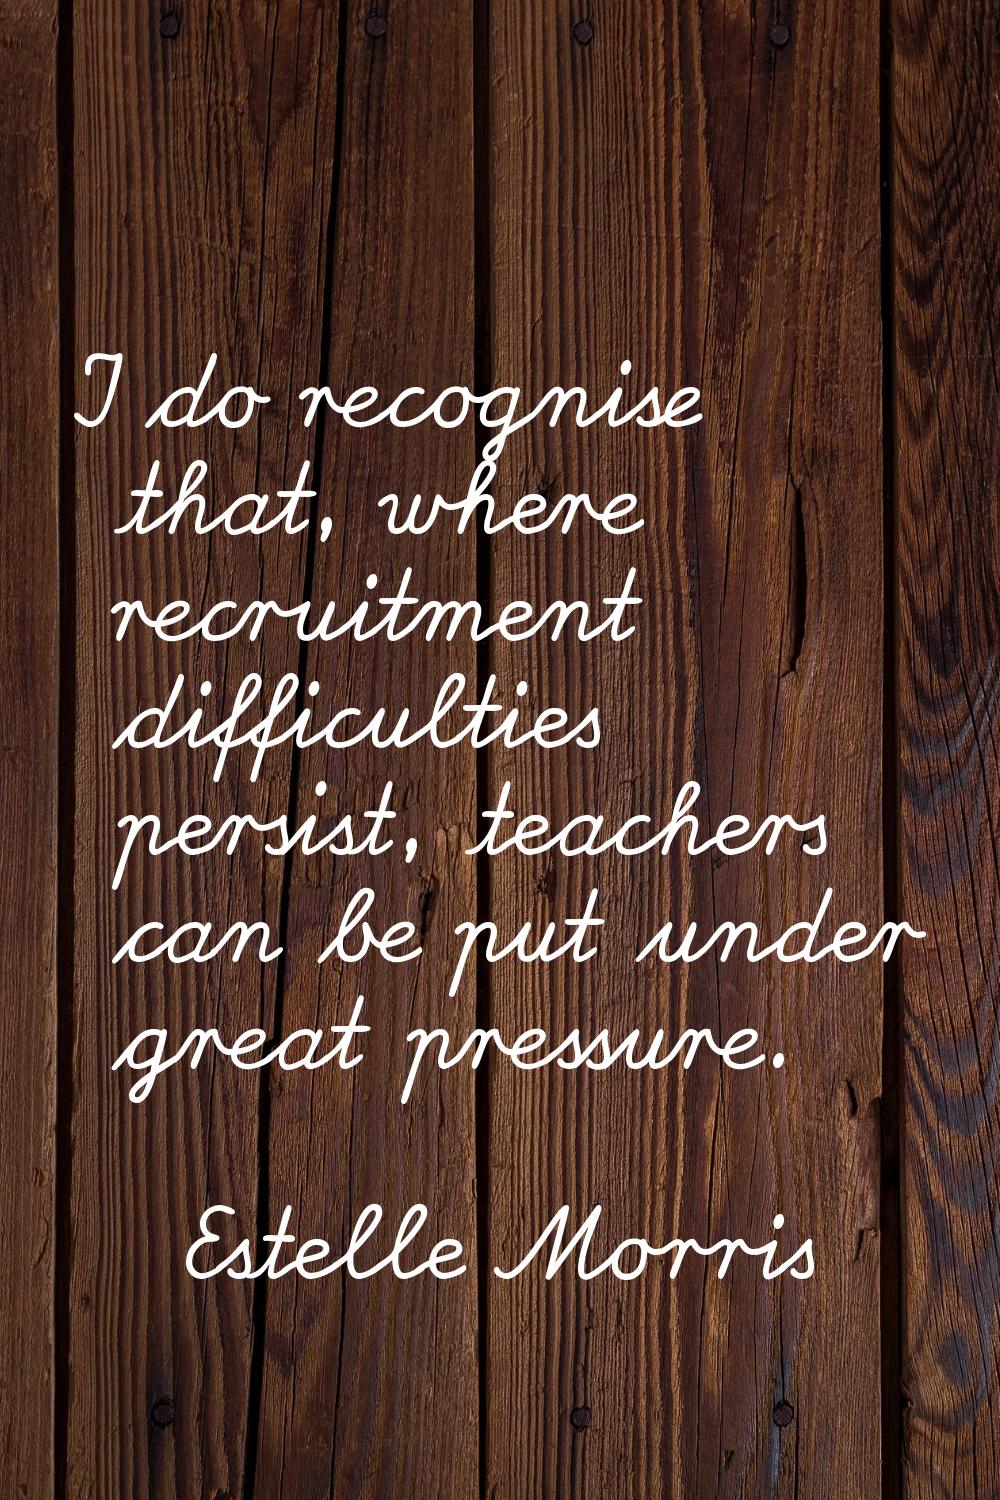 I do recognise that, where recruitment difficulties persist, teachers can be put under great pressu